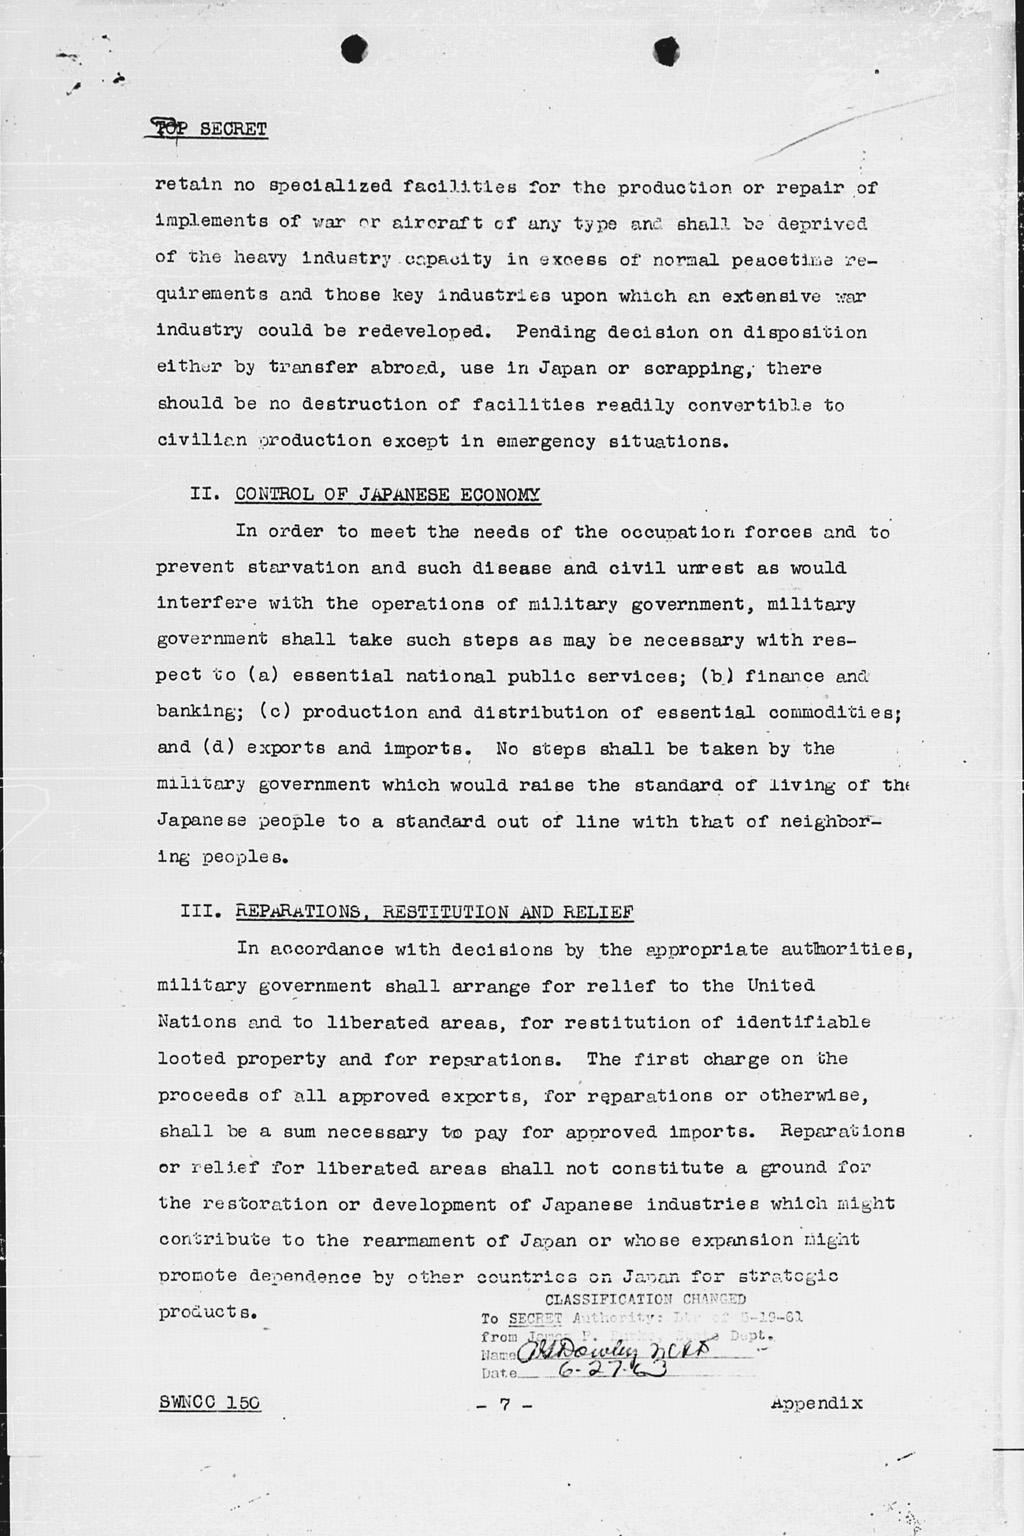 [Politico-Military Problems in the Far East: United States Initial Post-Defeat Policy Relating to Japan (SWNCC150)](Larger image)